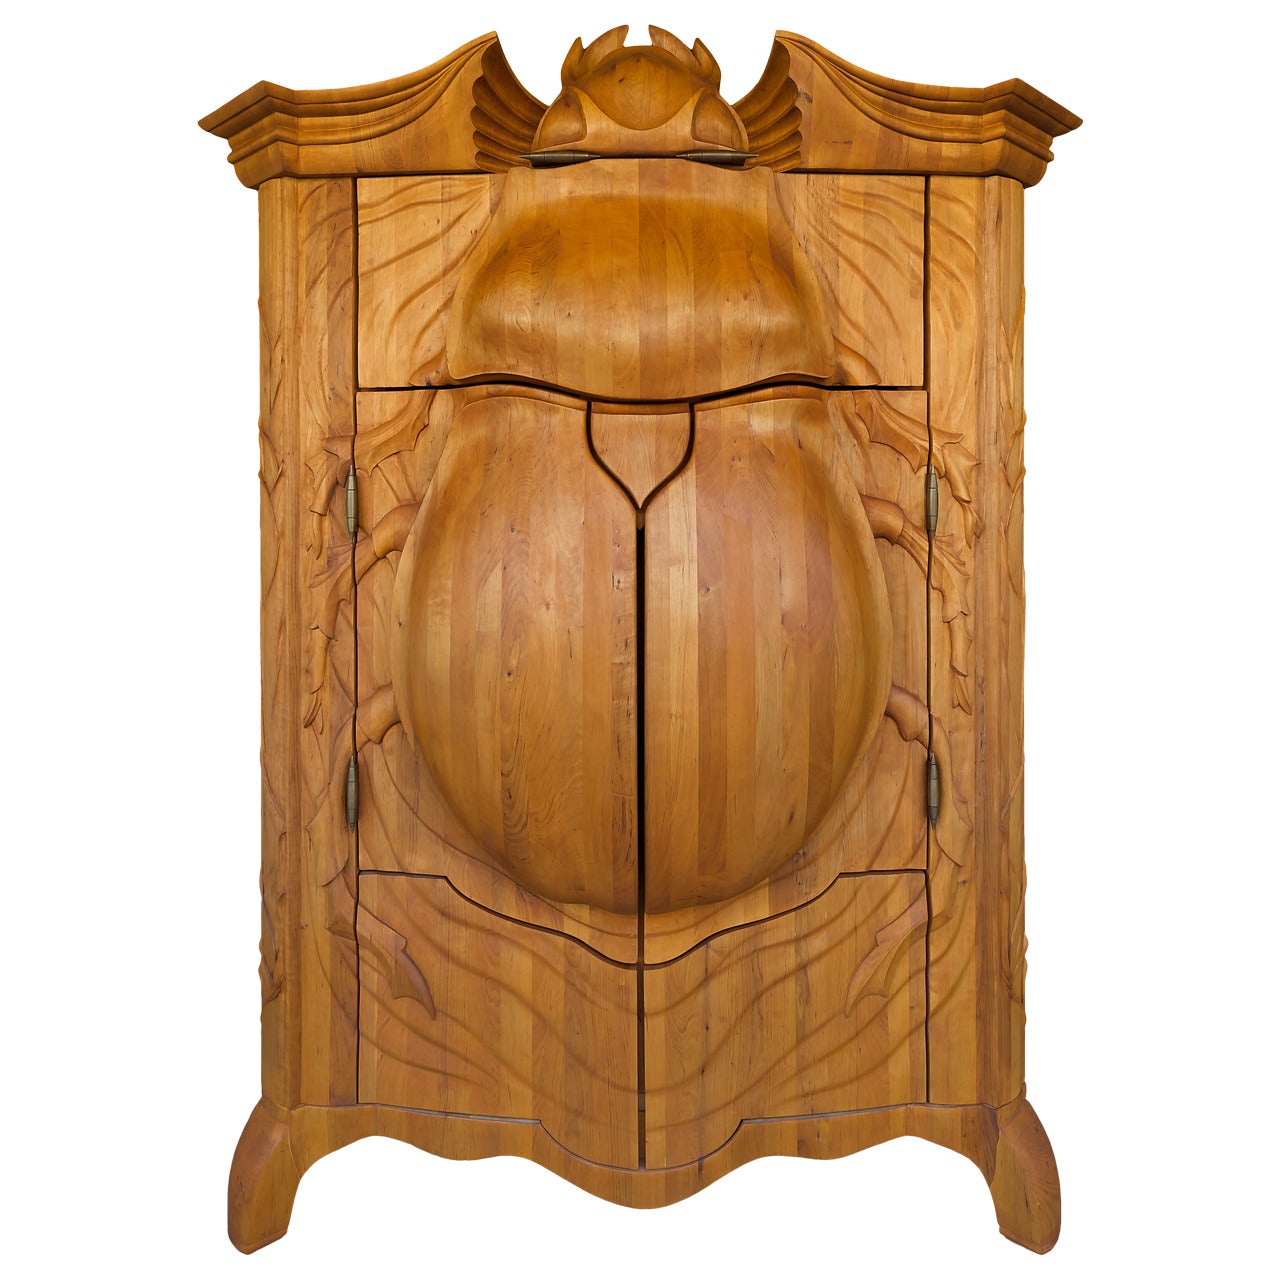 Unique and Extraordinary “Beetle” Cabinet Made by Janis Straupe, Latvia, 2014